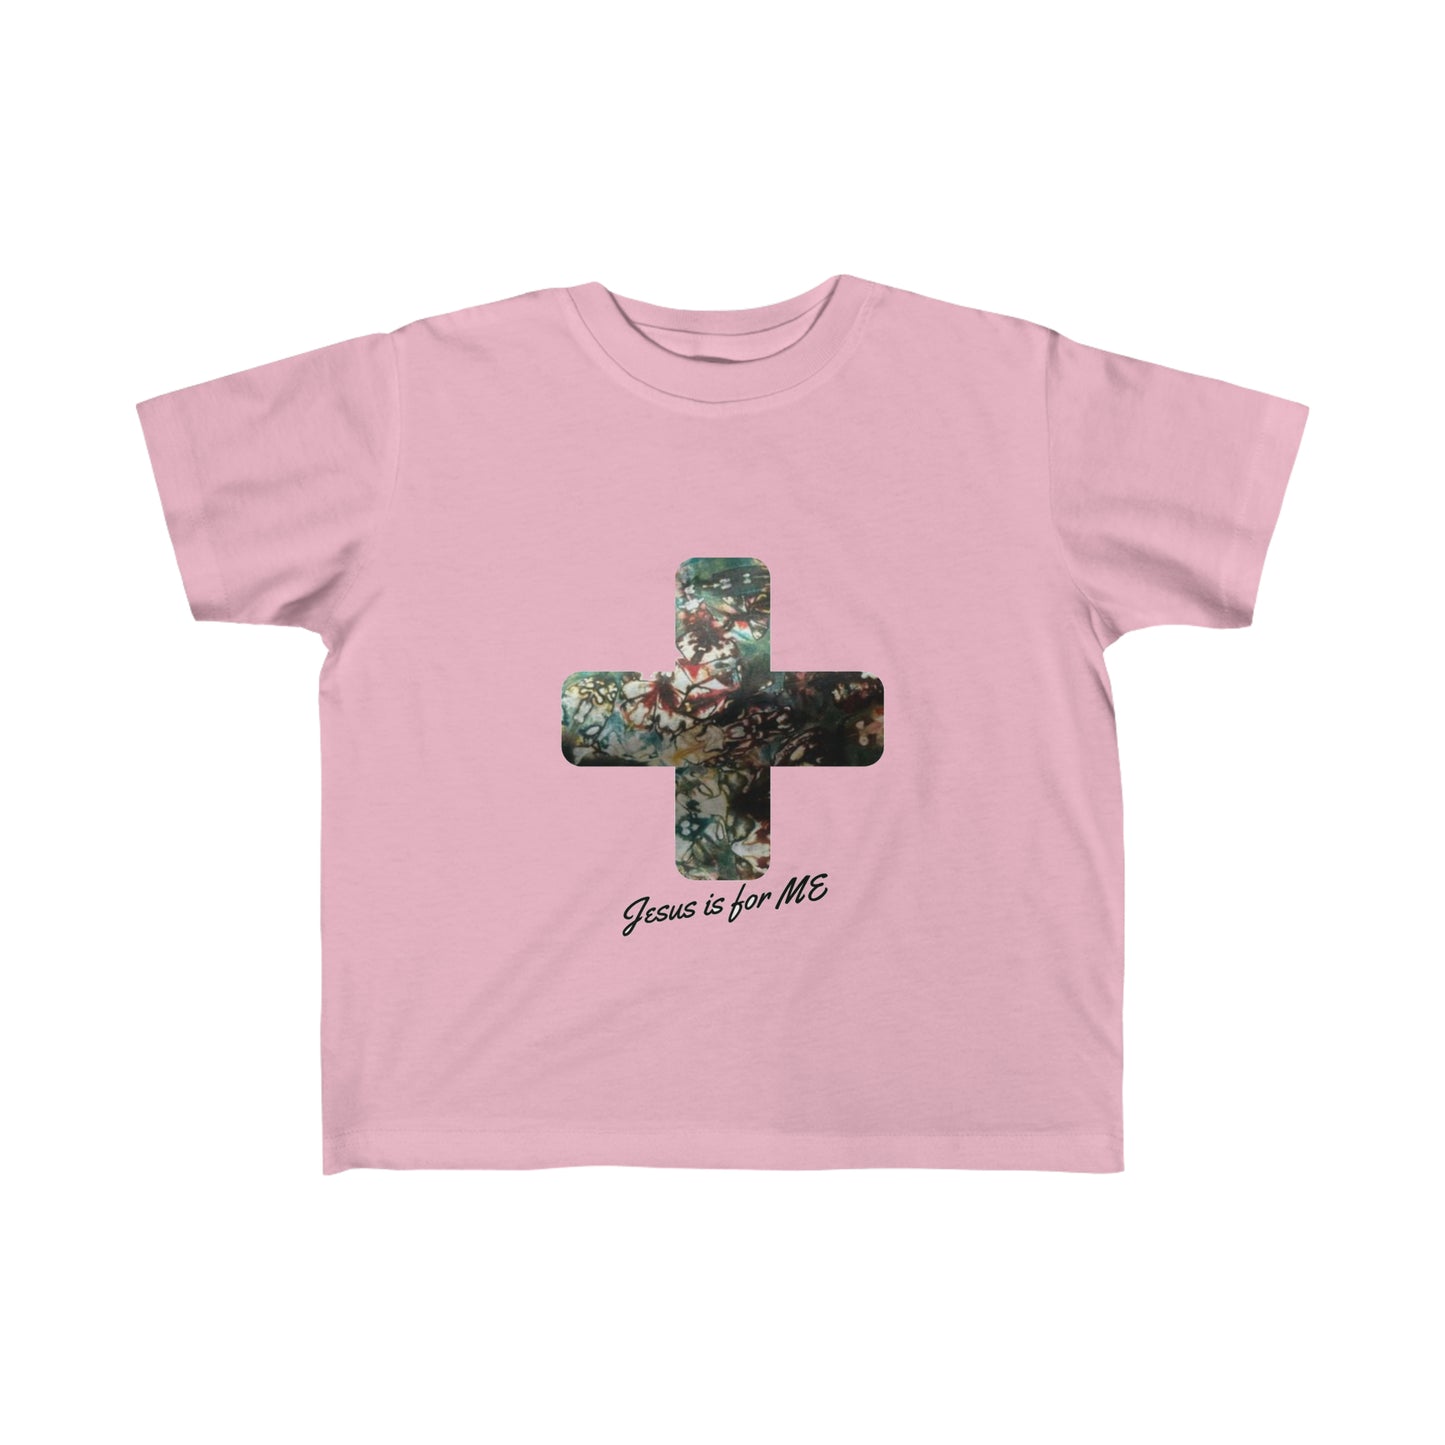 Jesus is for me Toddler's Fine Jersey Tee